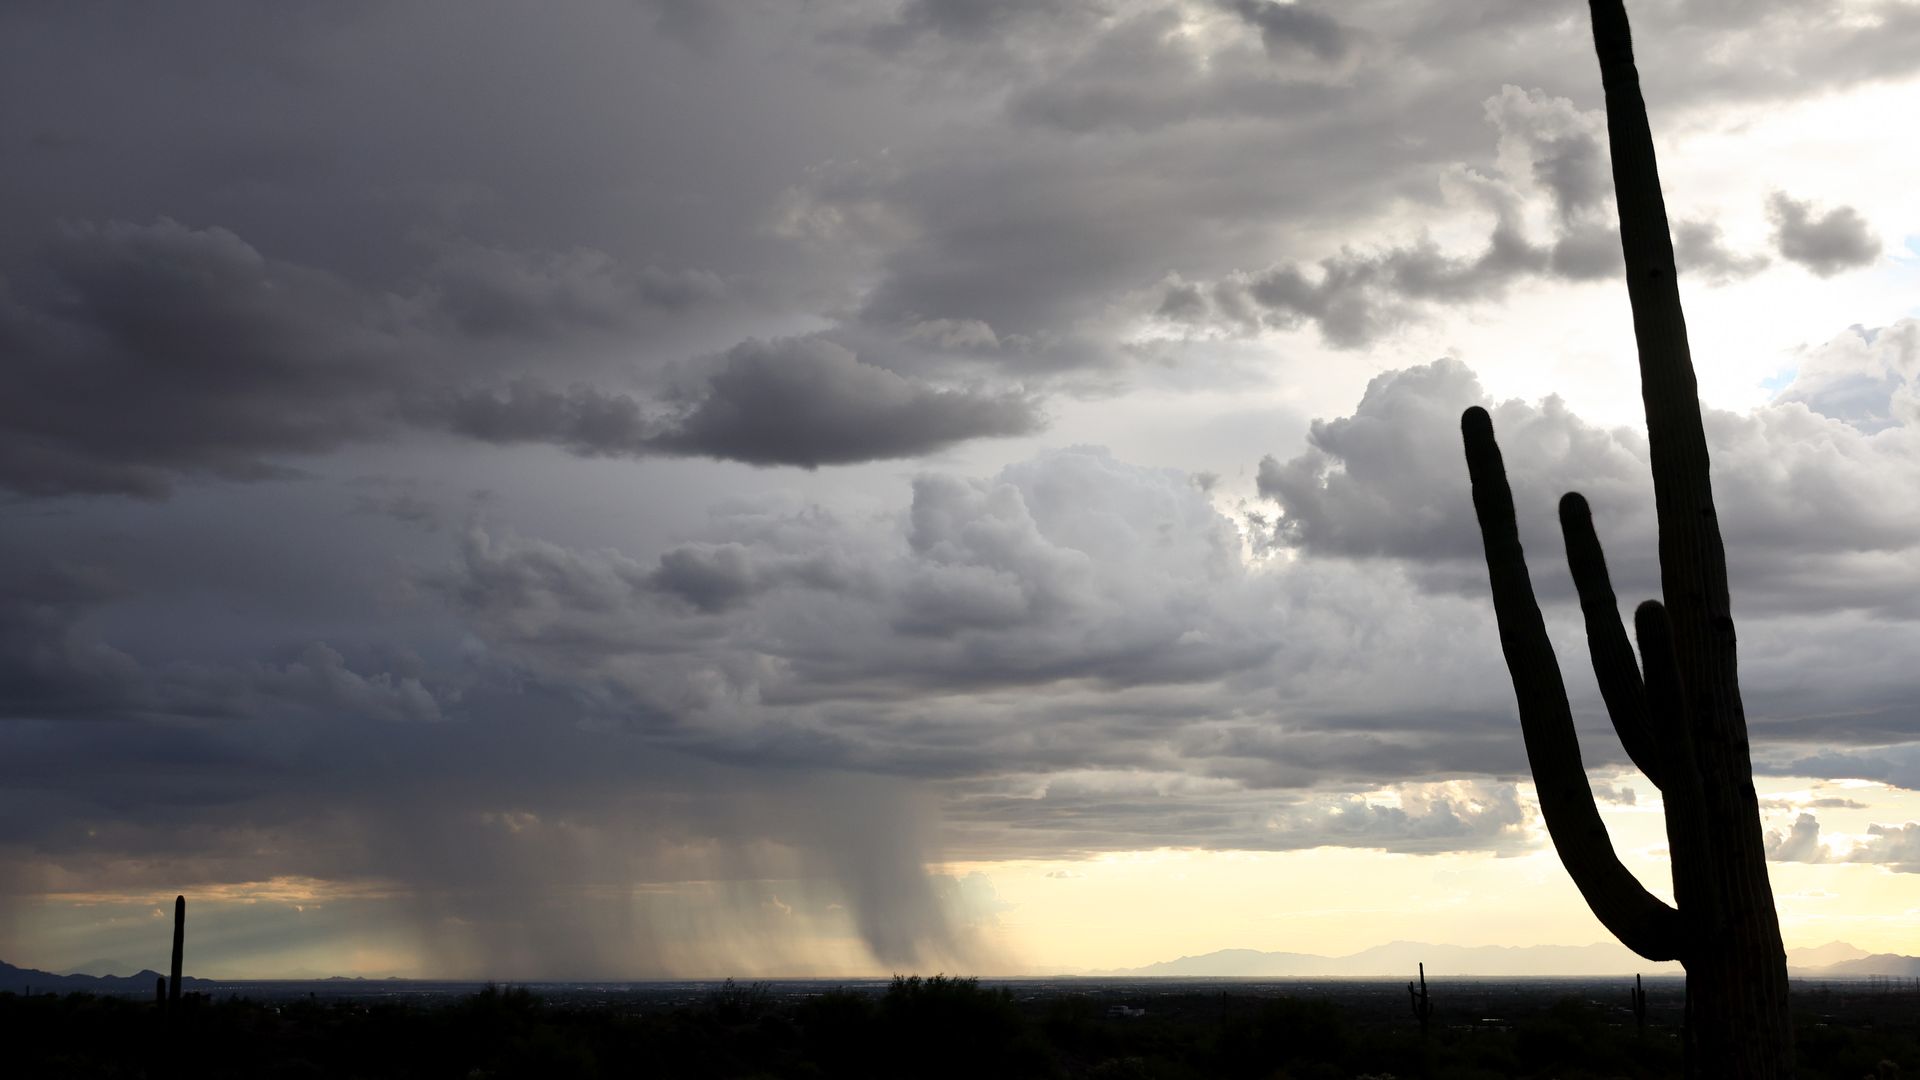 Rain with a saguaro cactus in the foregound.